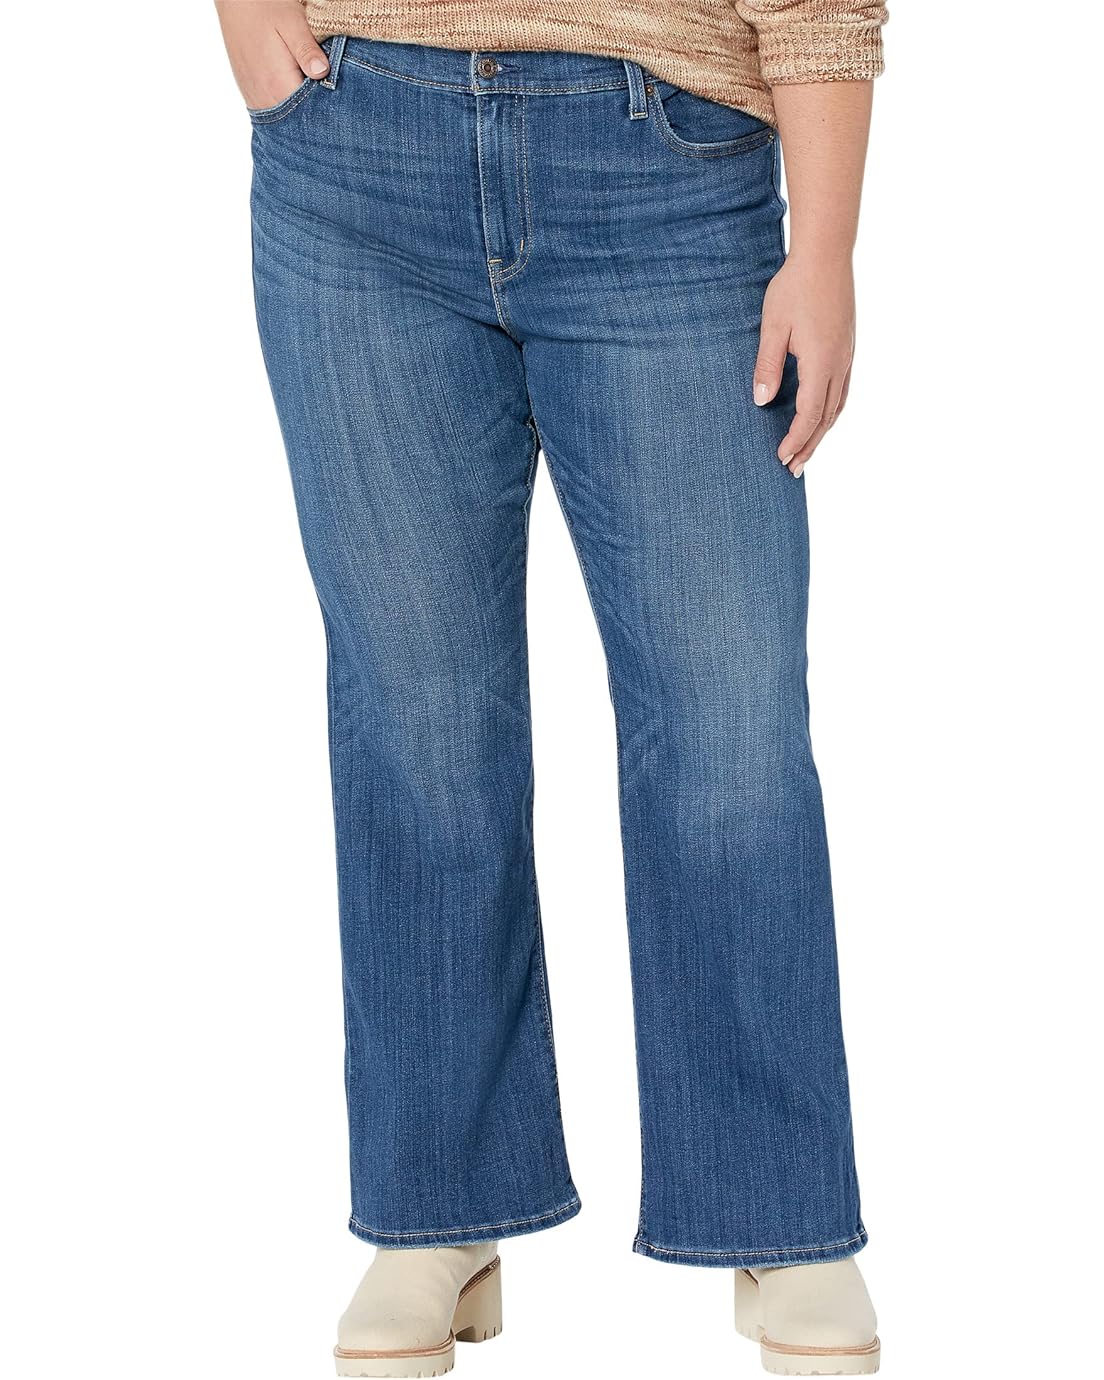 Levis Womens High-Rise Flare